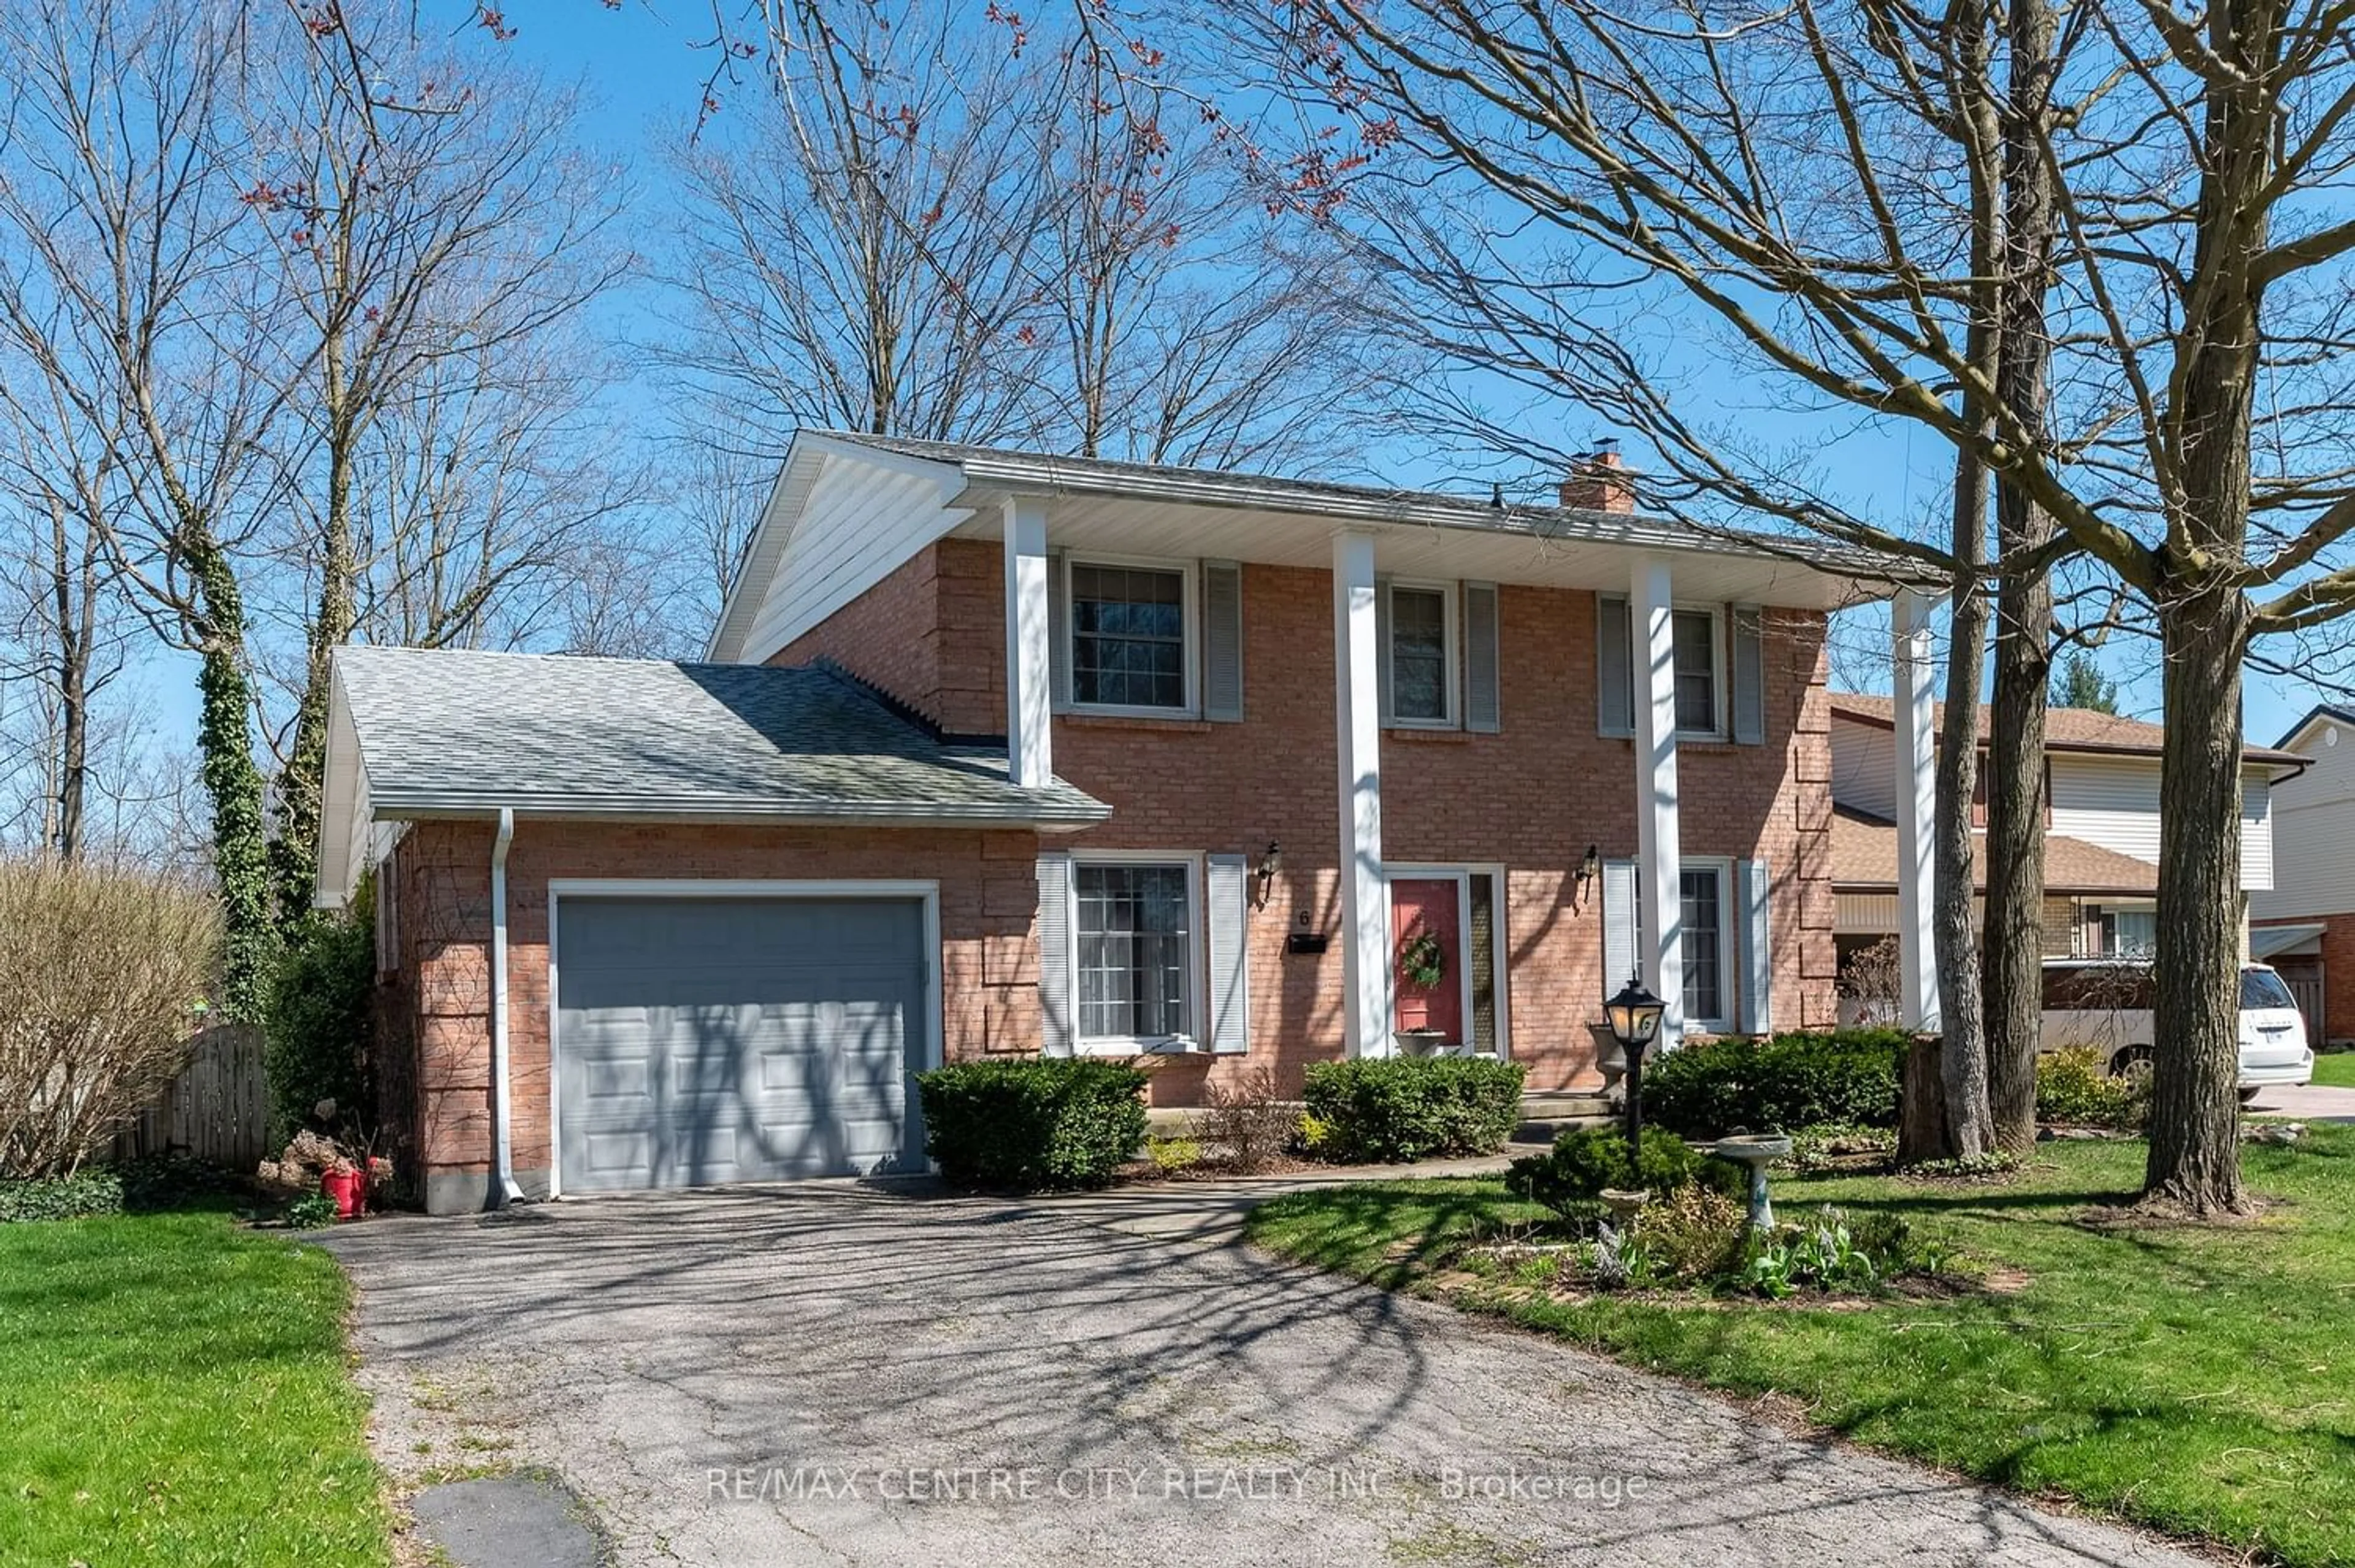 Home with brick exterior material for 6 WESTBURY Grve, London Ontario N6J 3E1